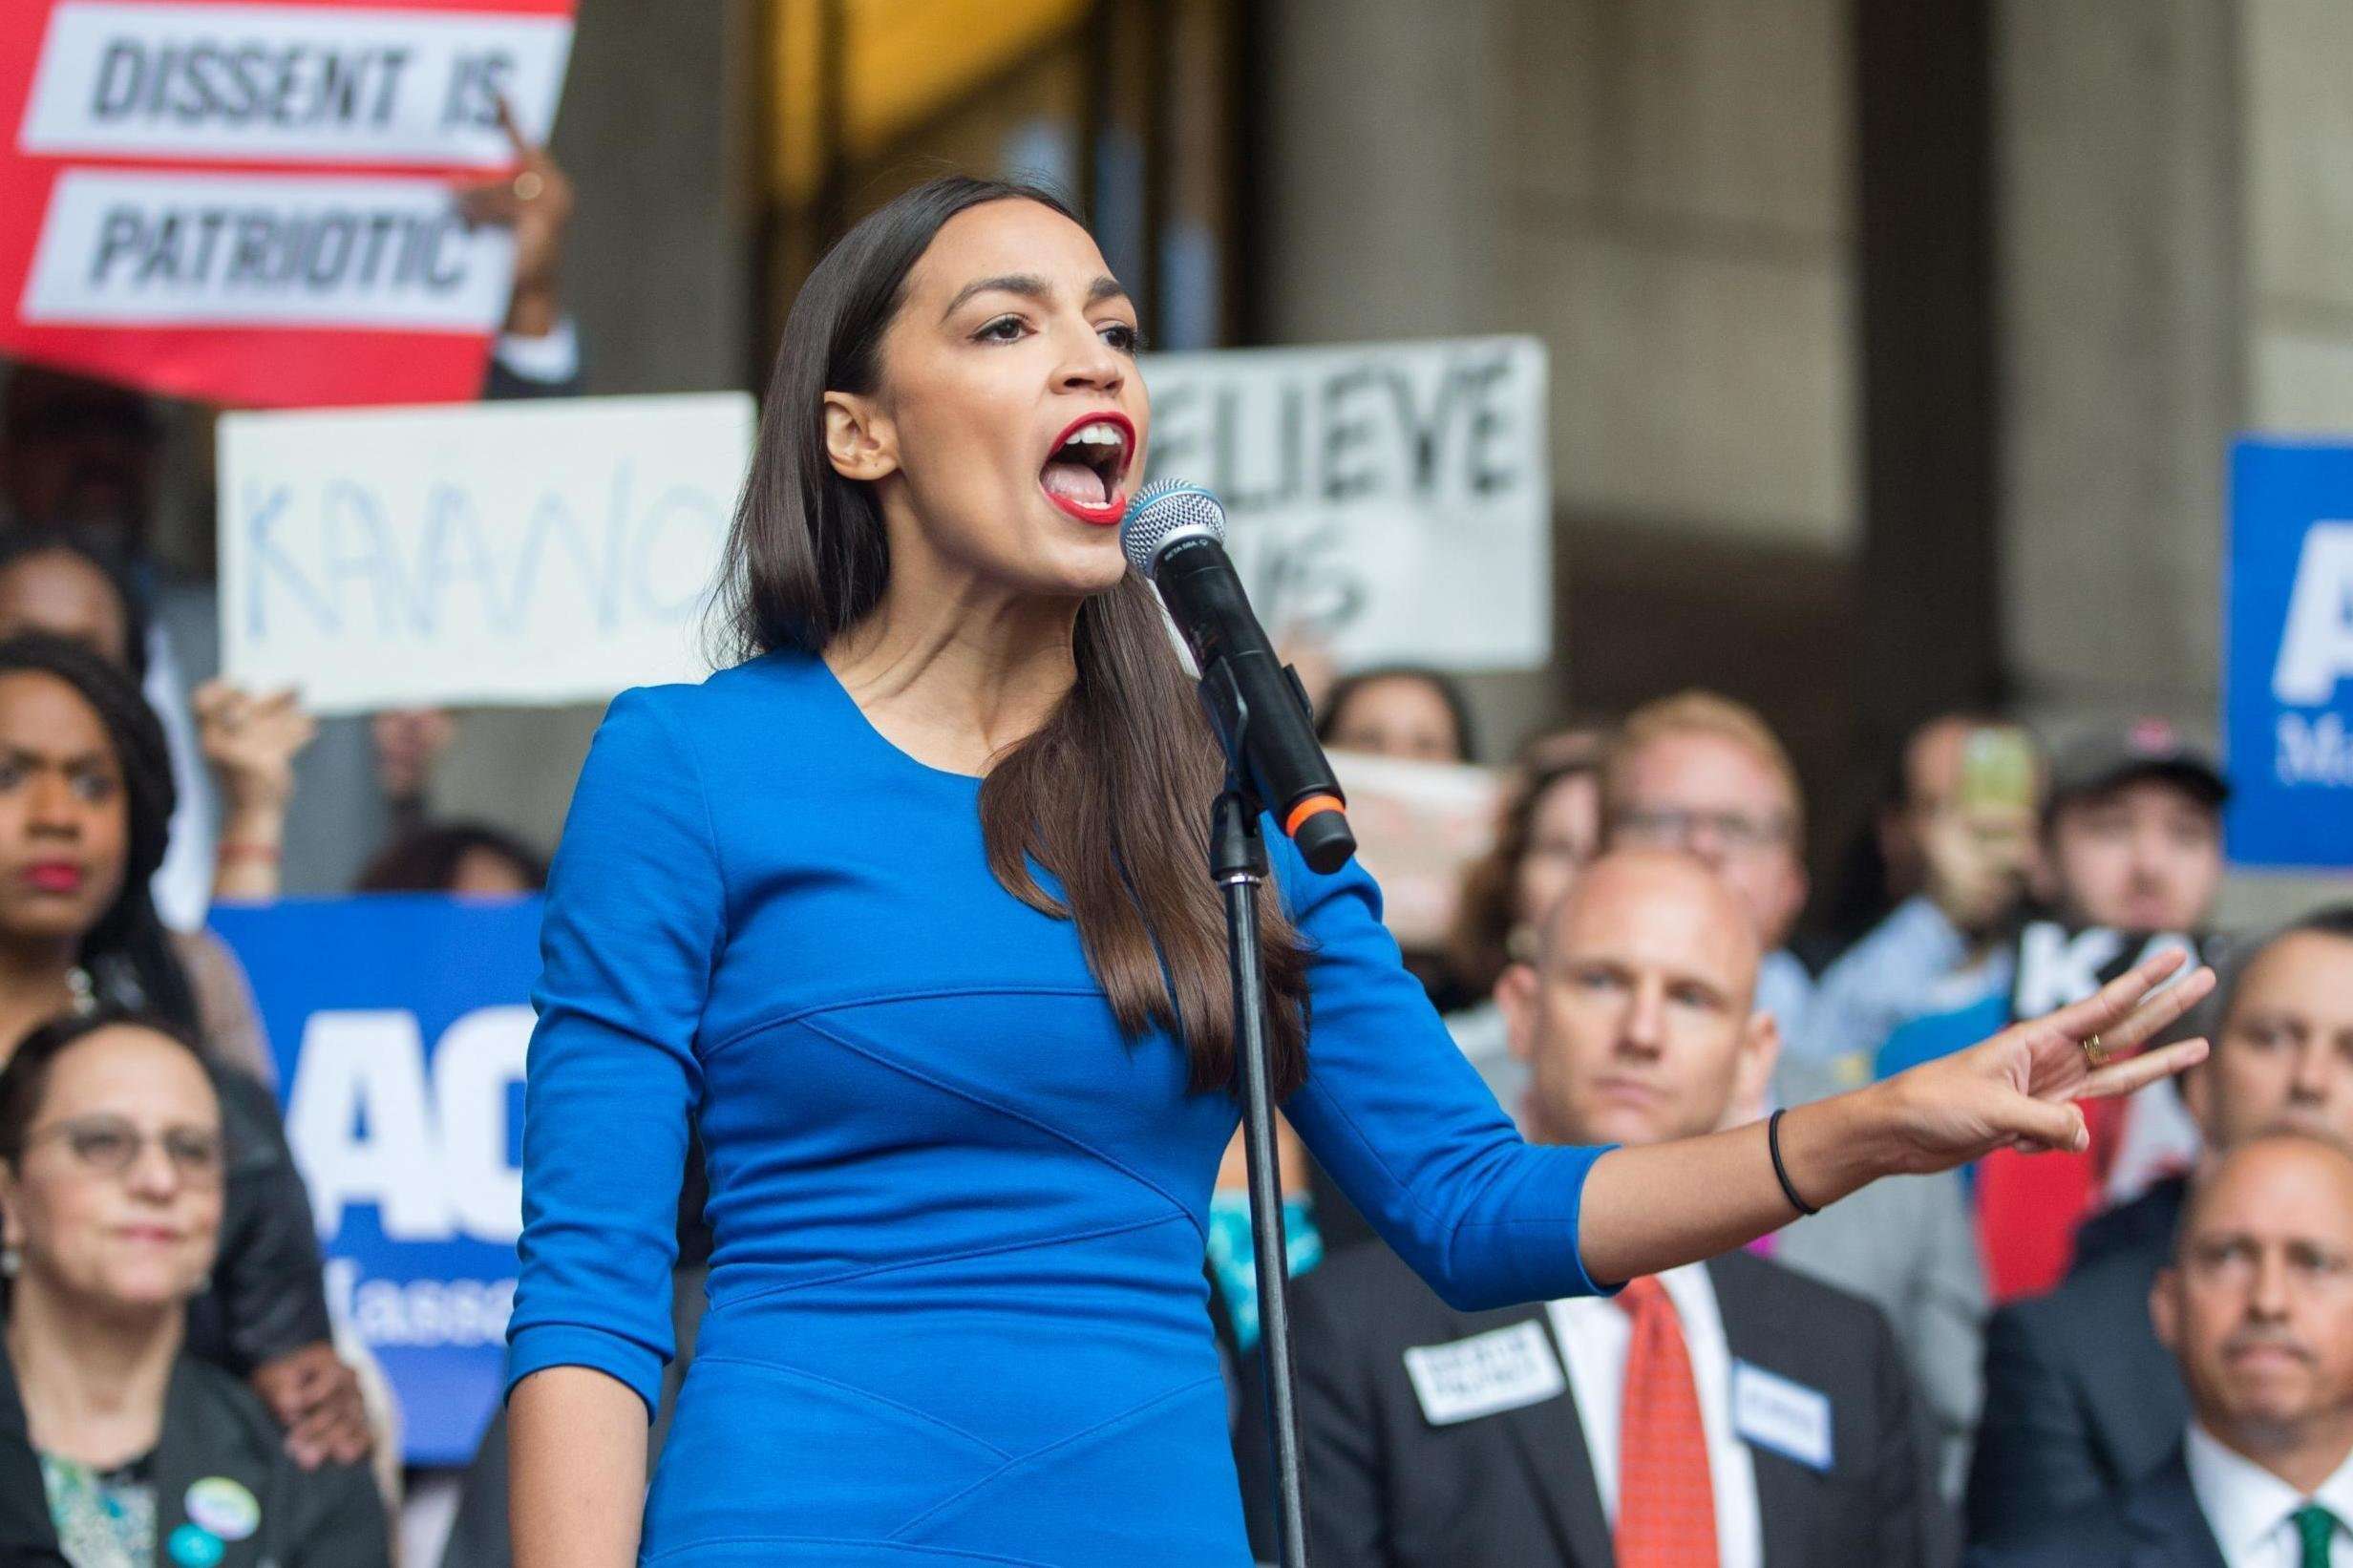 image for Alexandria Ocasio-Cortez receives so many death threats her staff performs visitor risk assessments